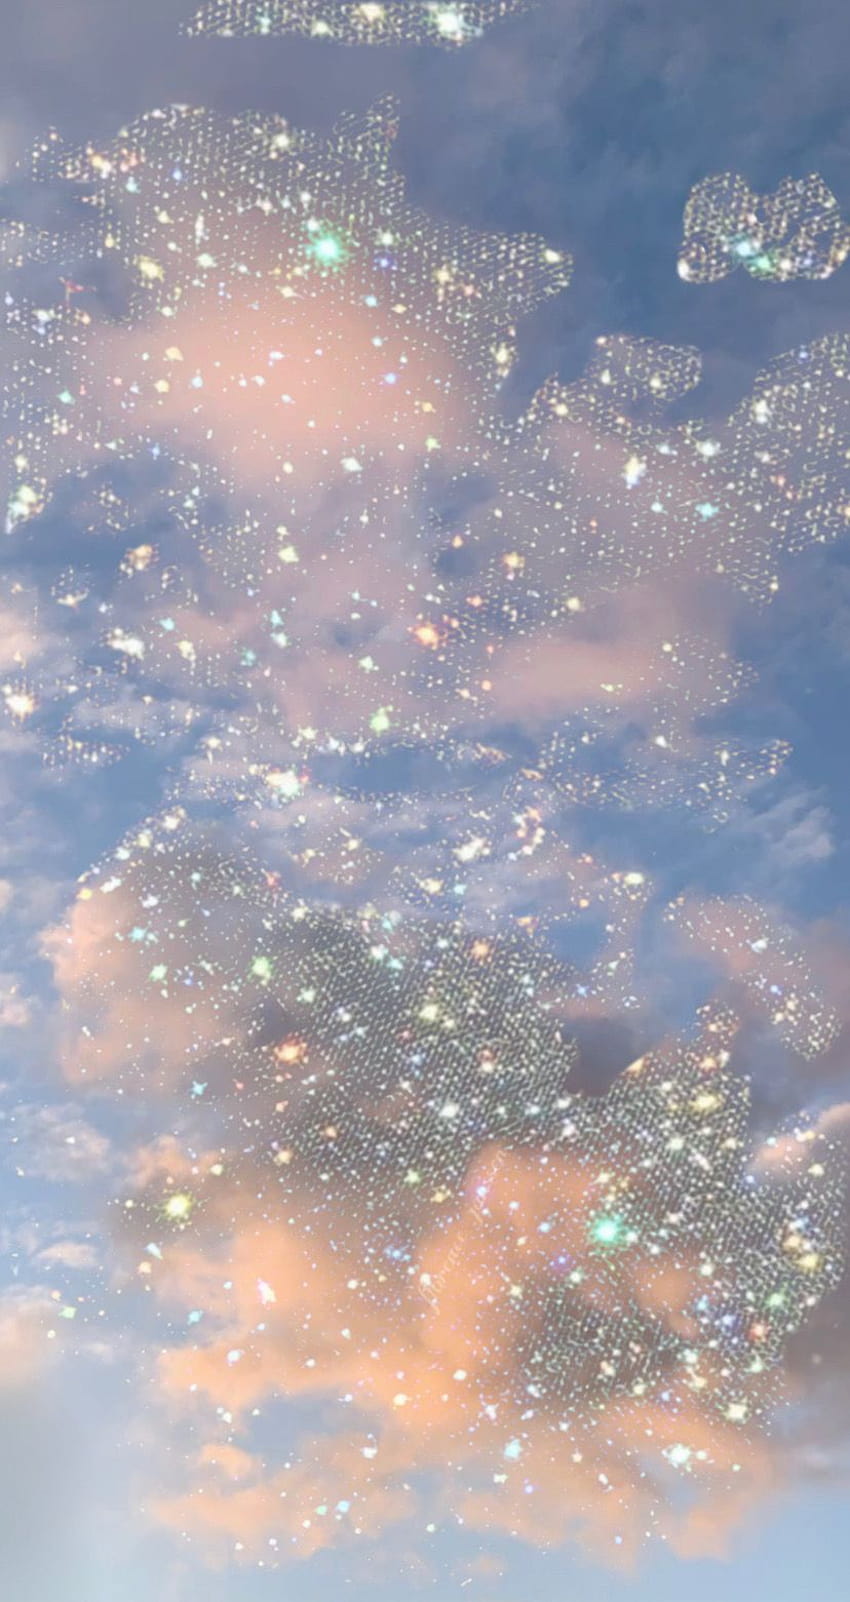 Aesthetic wallpaper for phone of a sky with clouds and stars - Glitter